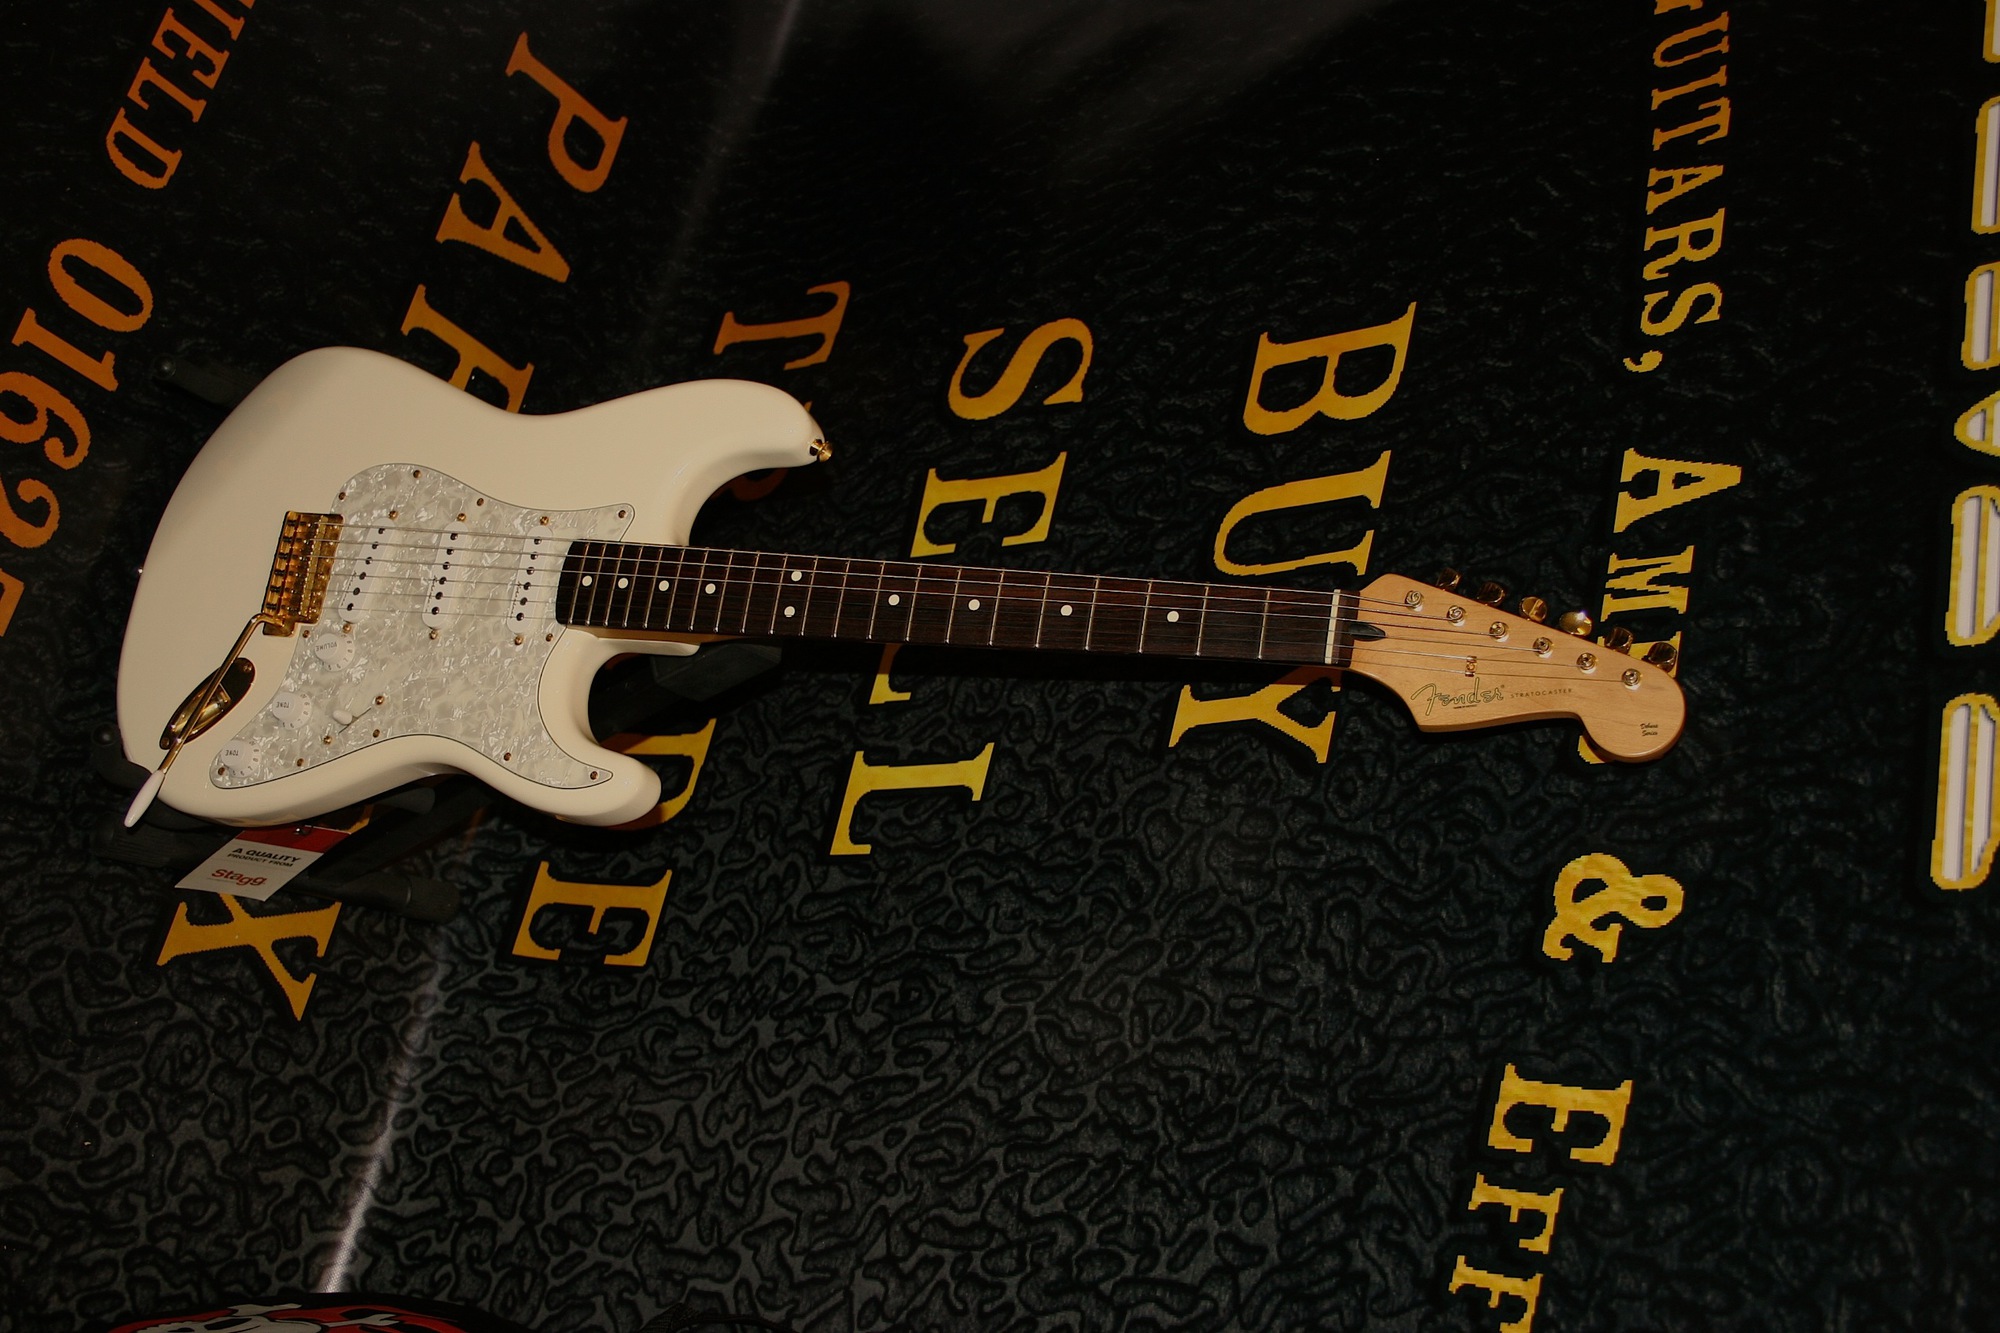 Fender mex deluxe stratocaster**SOLD - Amp Guitars, Macclesfield